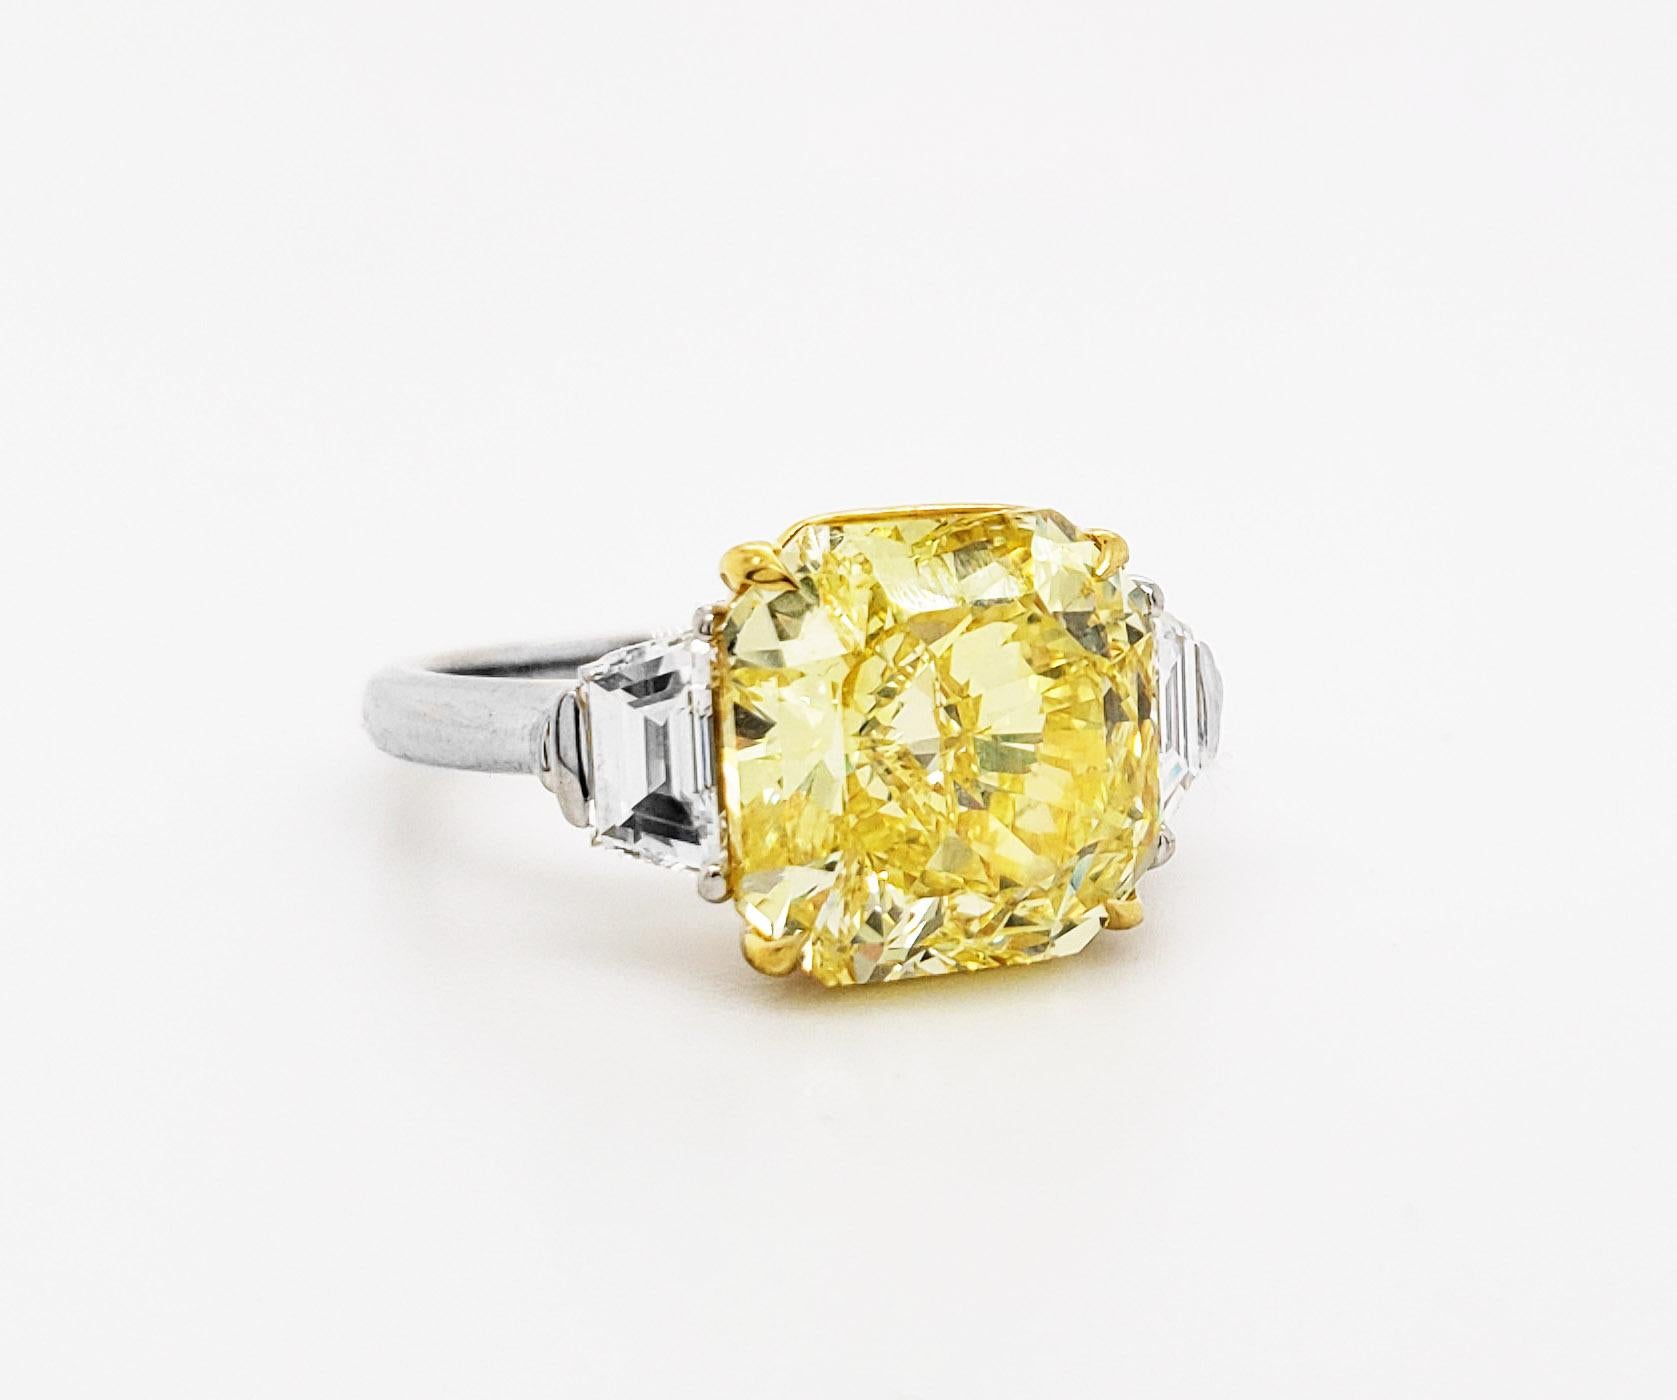 From SCARSELLI, this beautiful statement ring features a 5.00 carat Fancy Vivid Yellow Radiant Cut Diamond of VVS2 clarity flanked with trapezoid cut white diamonds 0.70carat (.35 each) See pictures for details. (see certificate picture for more